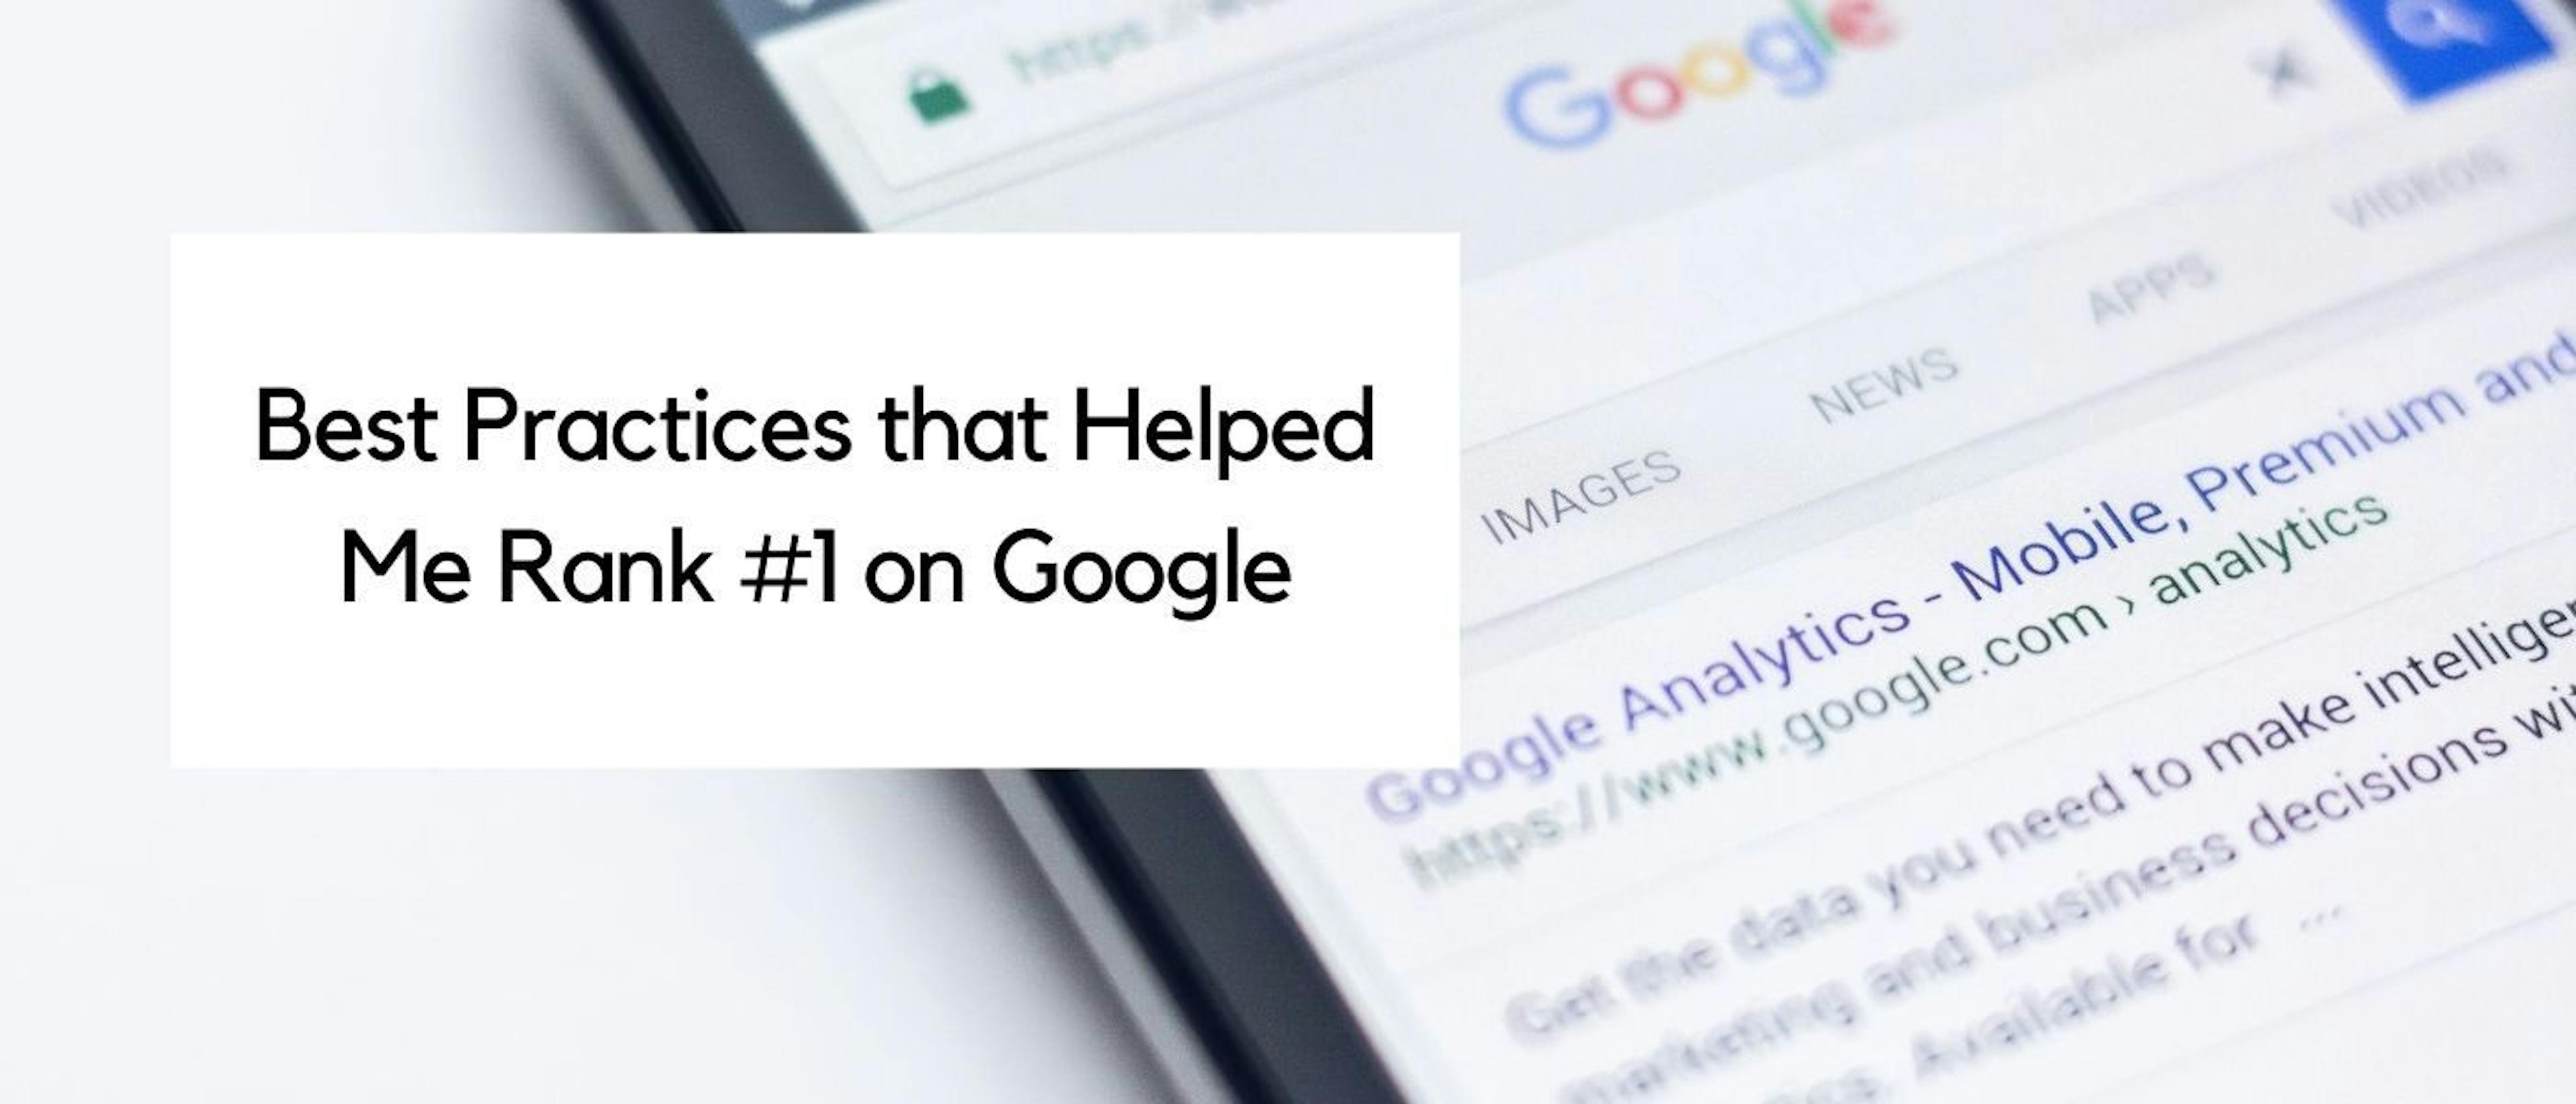 featured image - 7 Best Practices That Helped Me Rank #1 on Google